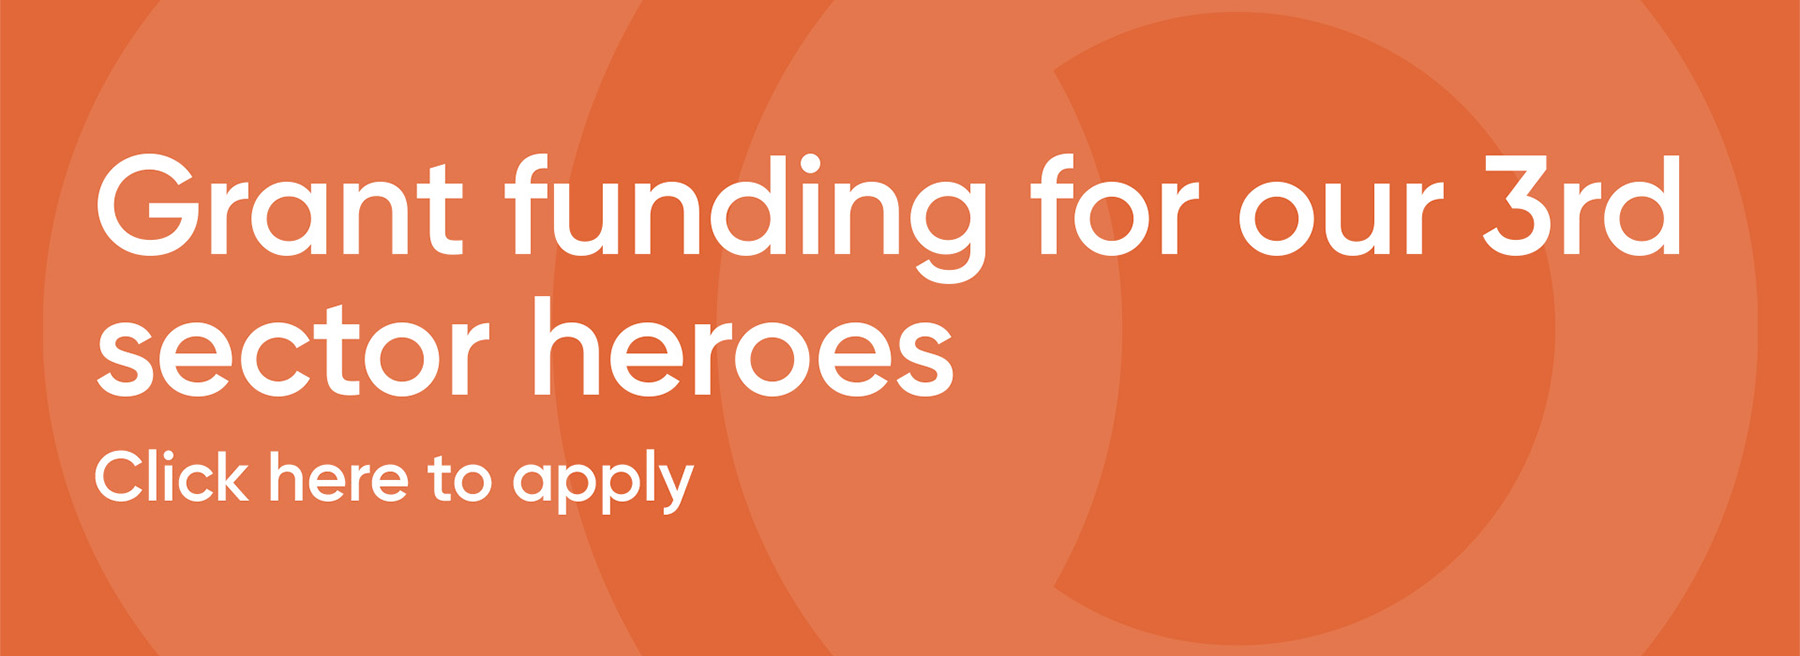 Grant funding for our 3rd sector heroes